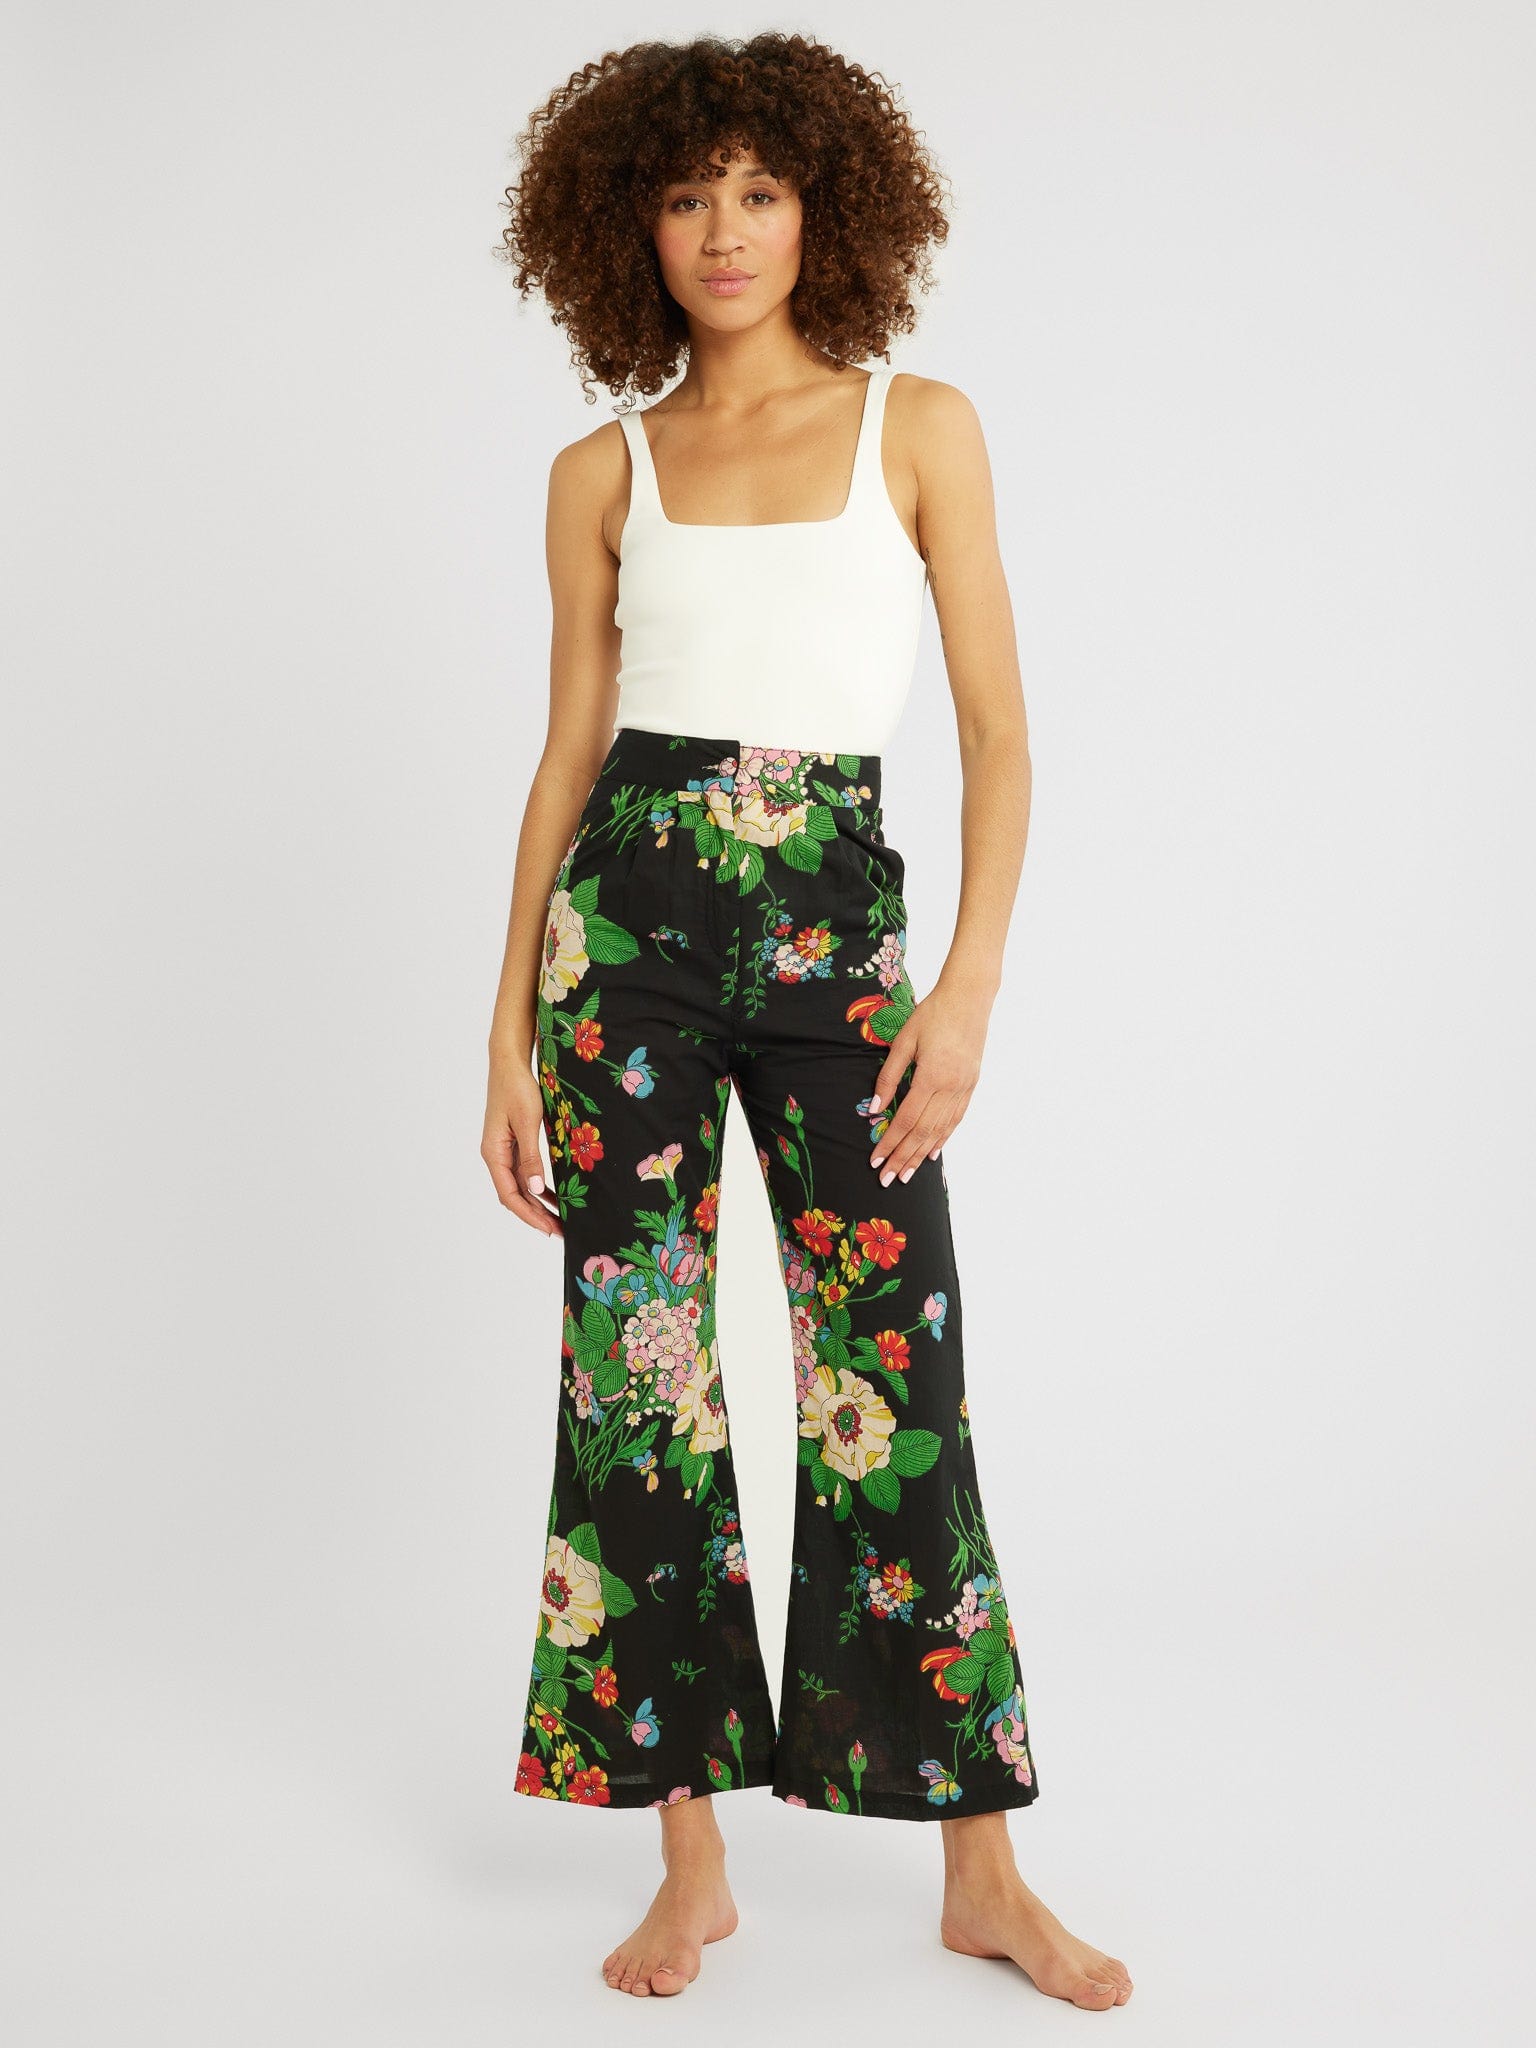 MILLE Clothing Anita Pant in Finale